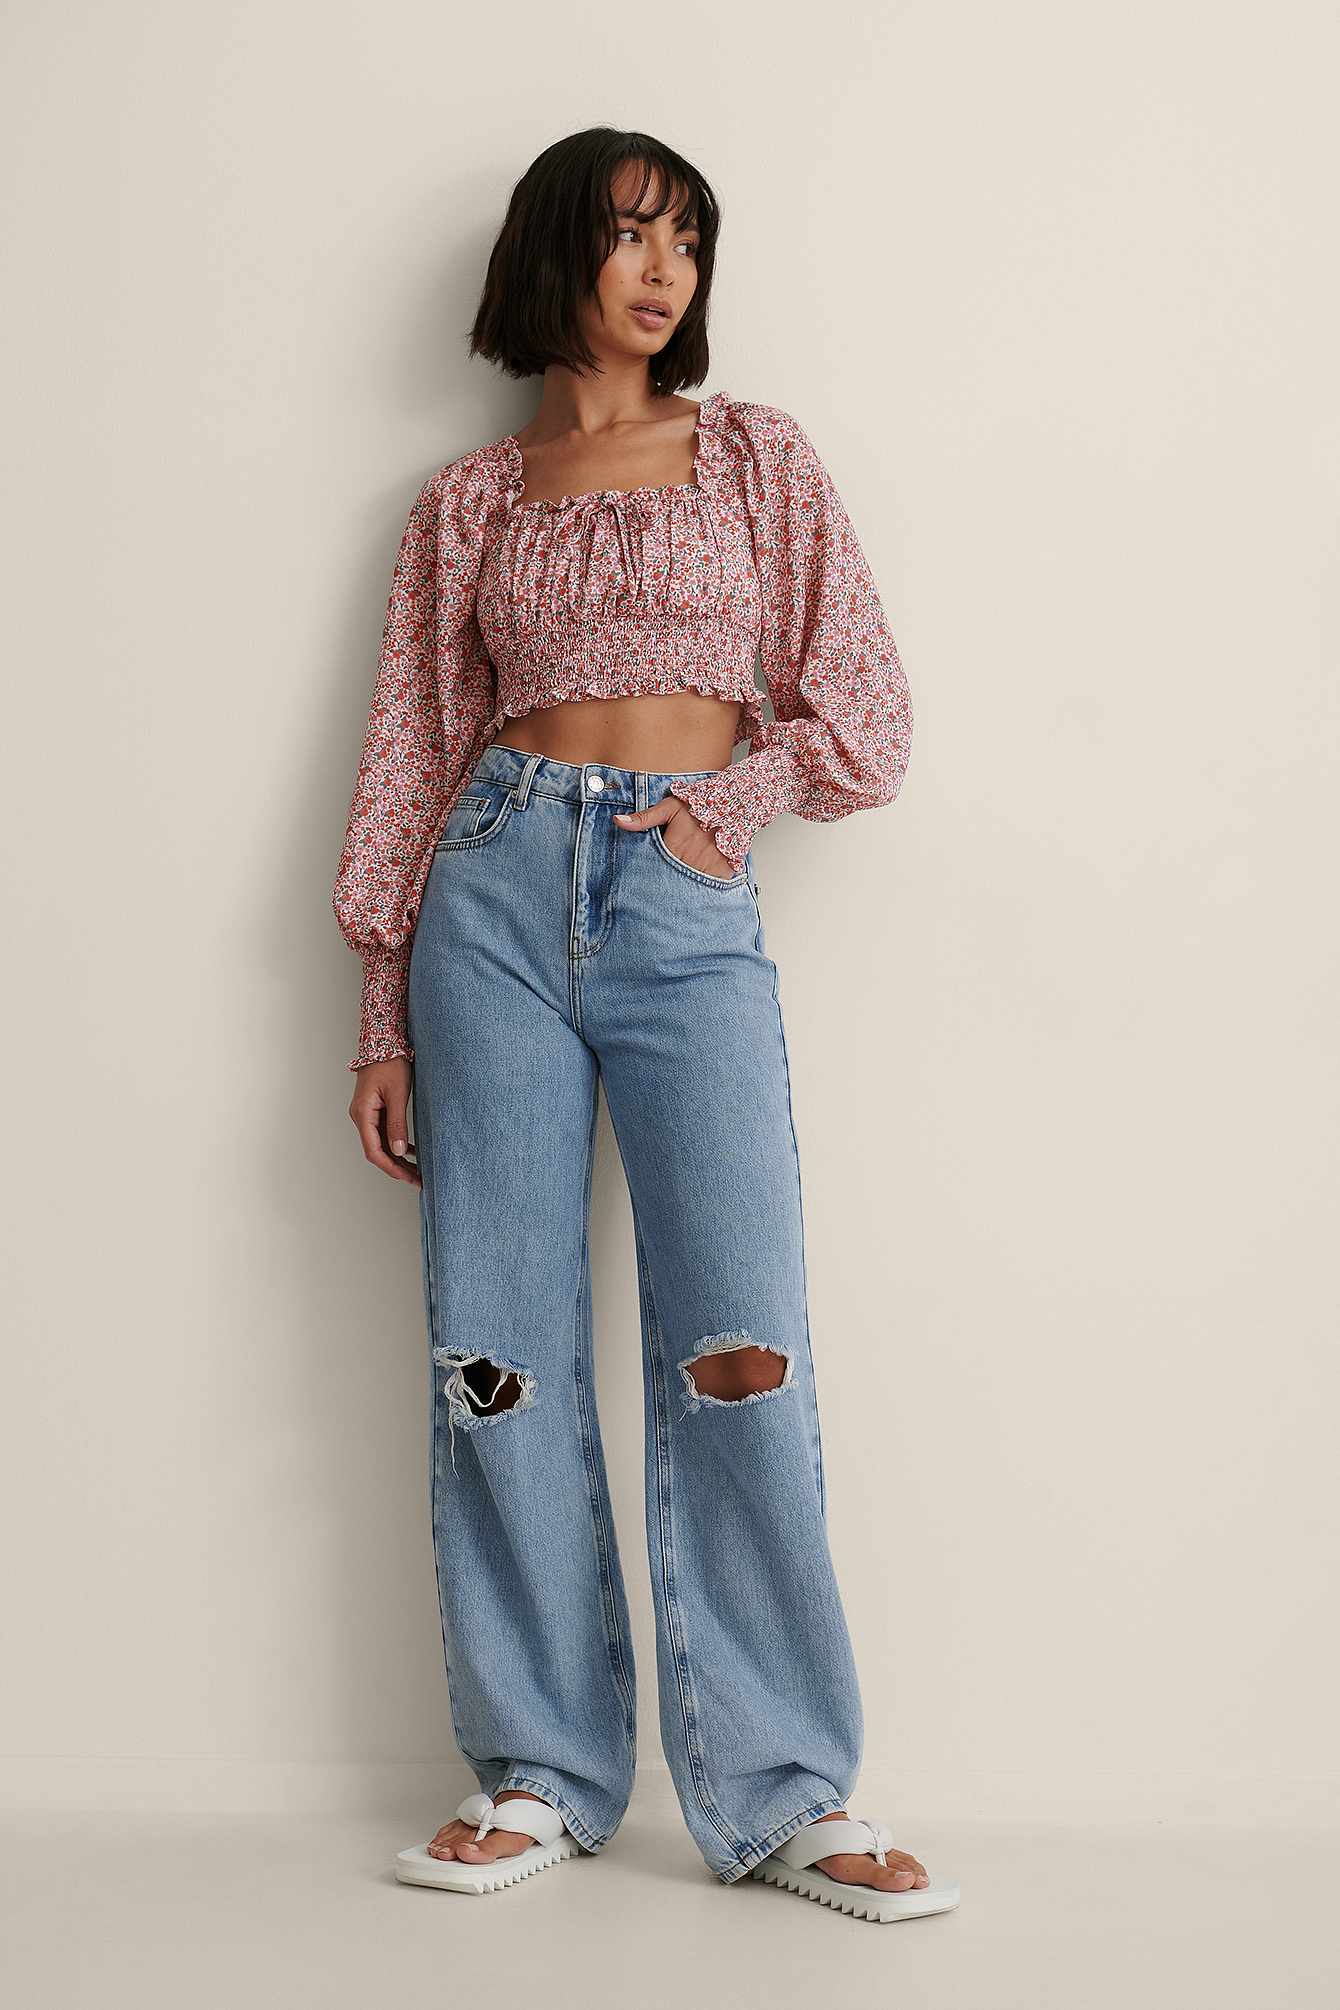 Smock Waist Crop Top Outfit.